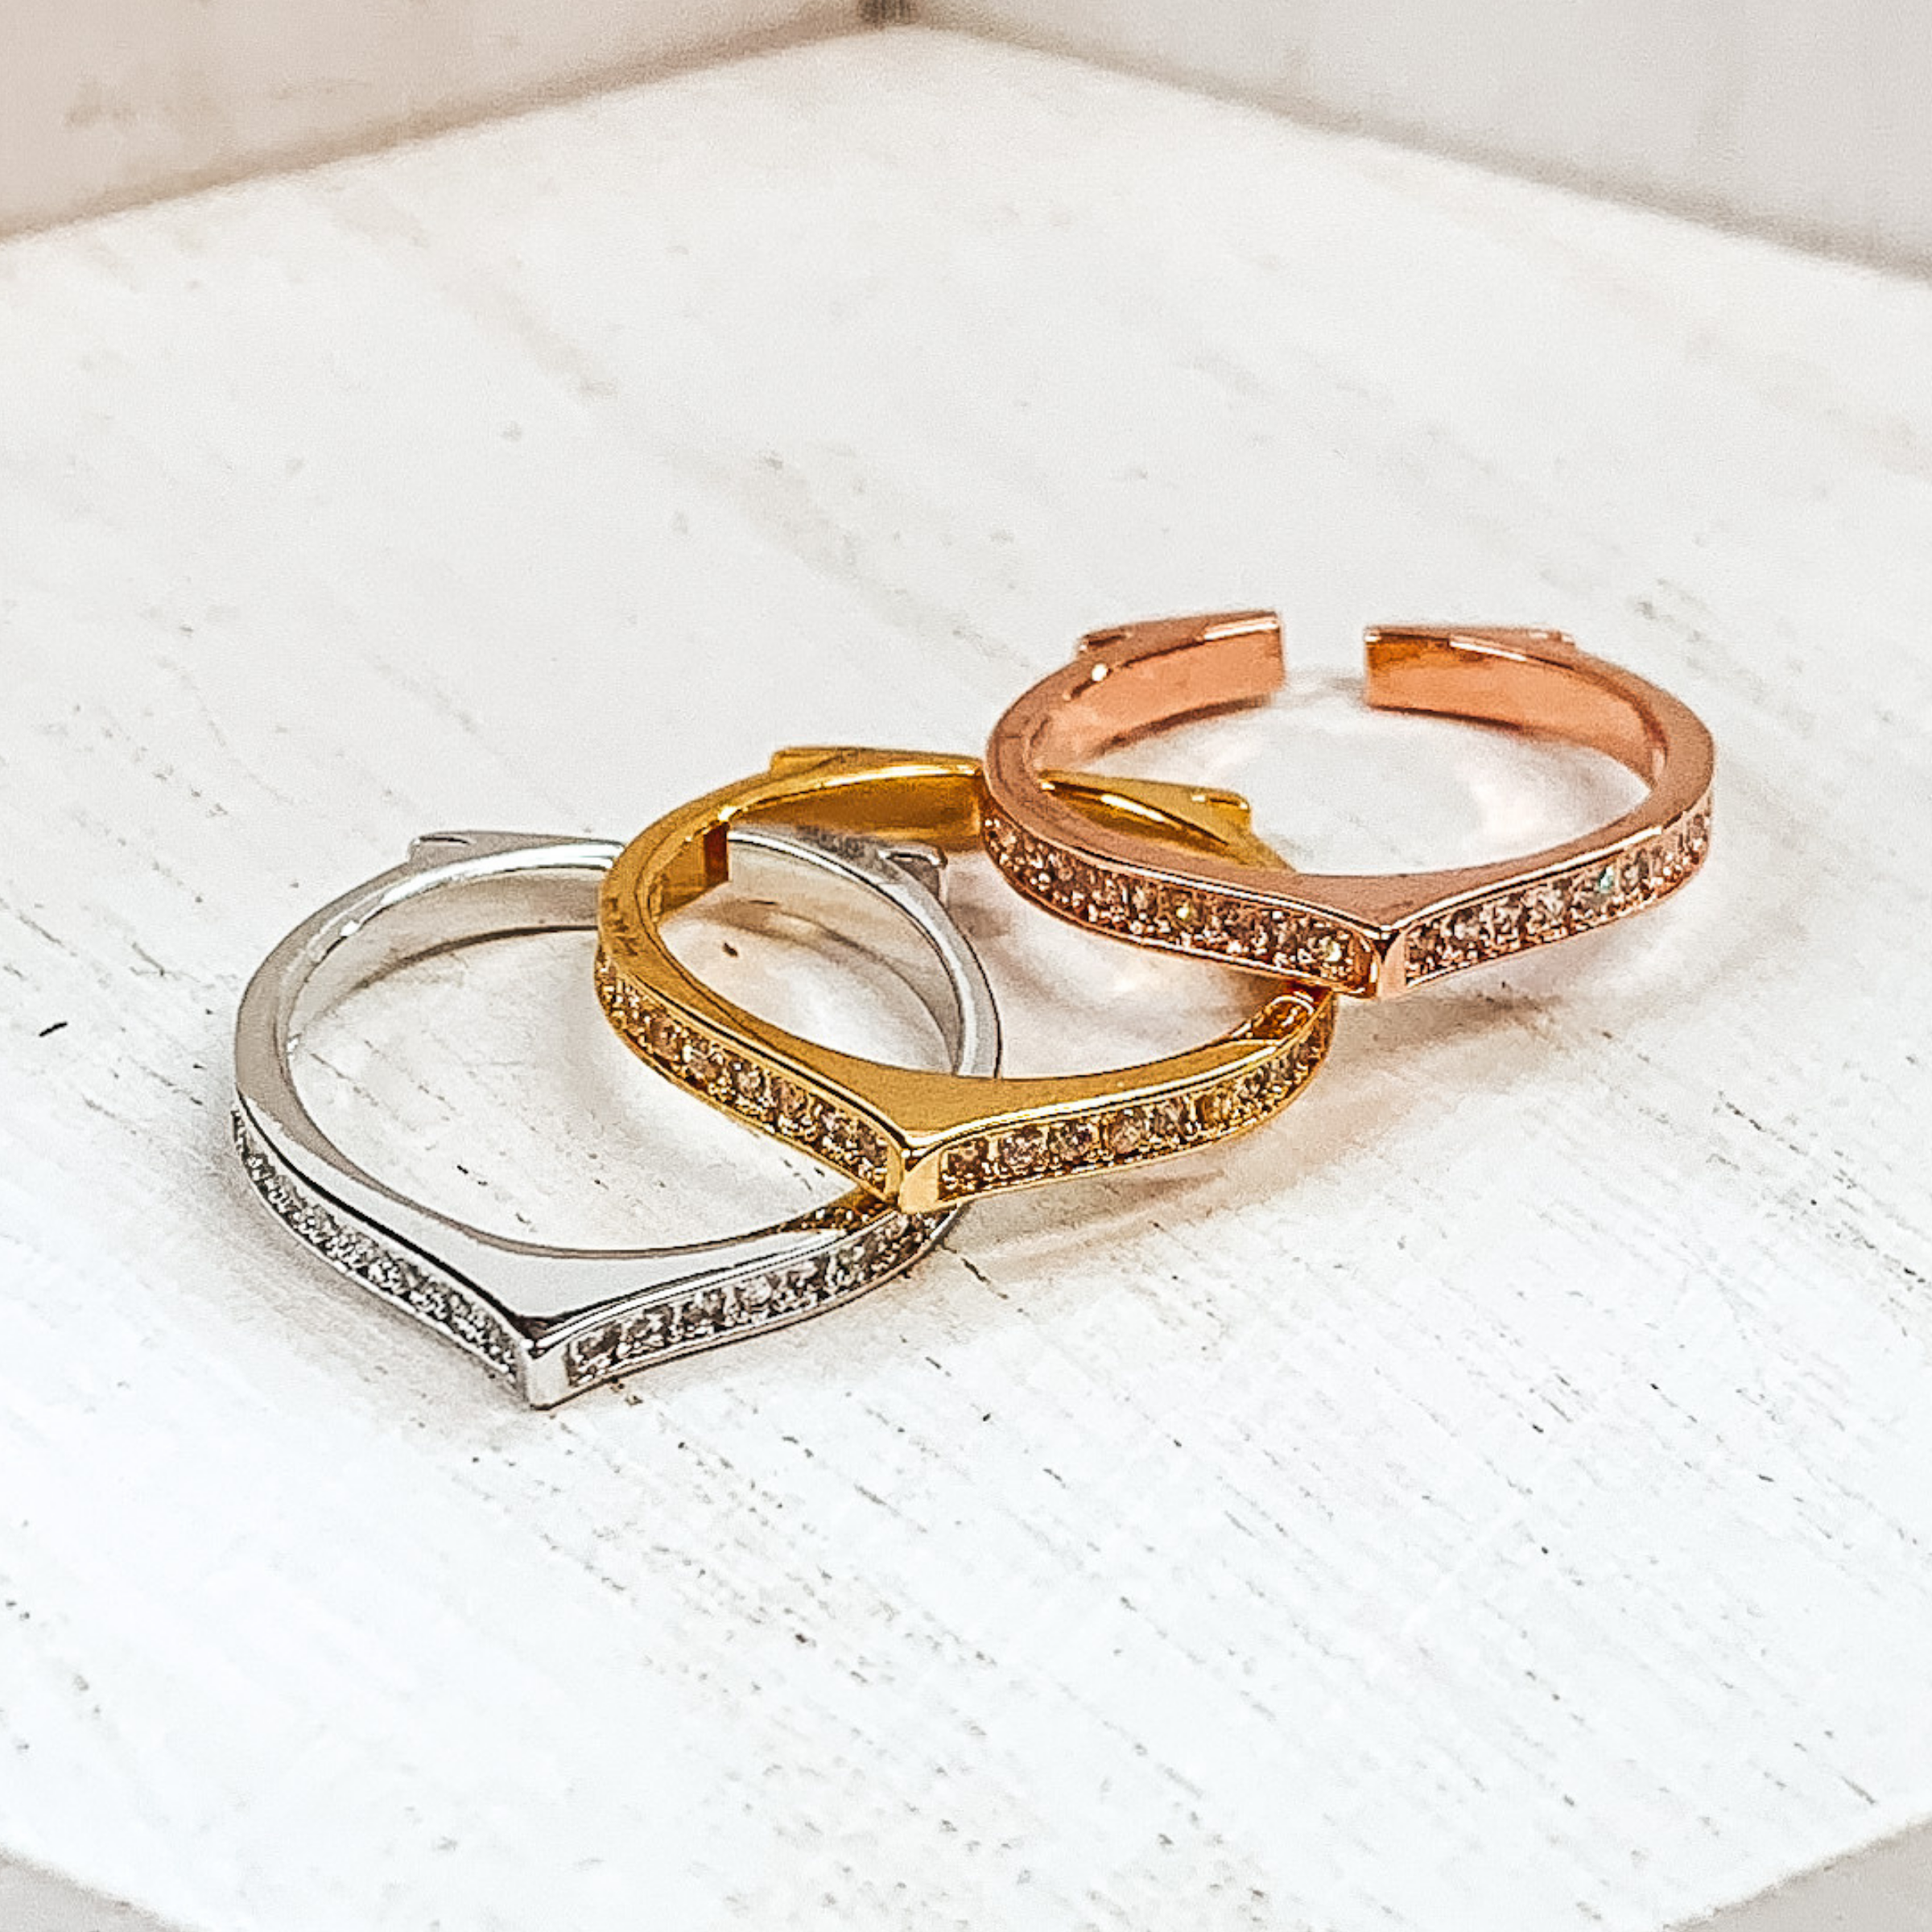 Set of three open rings in silver, gold, and rose gold. Each ring has a pointed center with crystals in the center matching the color of the ring. These rings are pictured on a white background. 